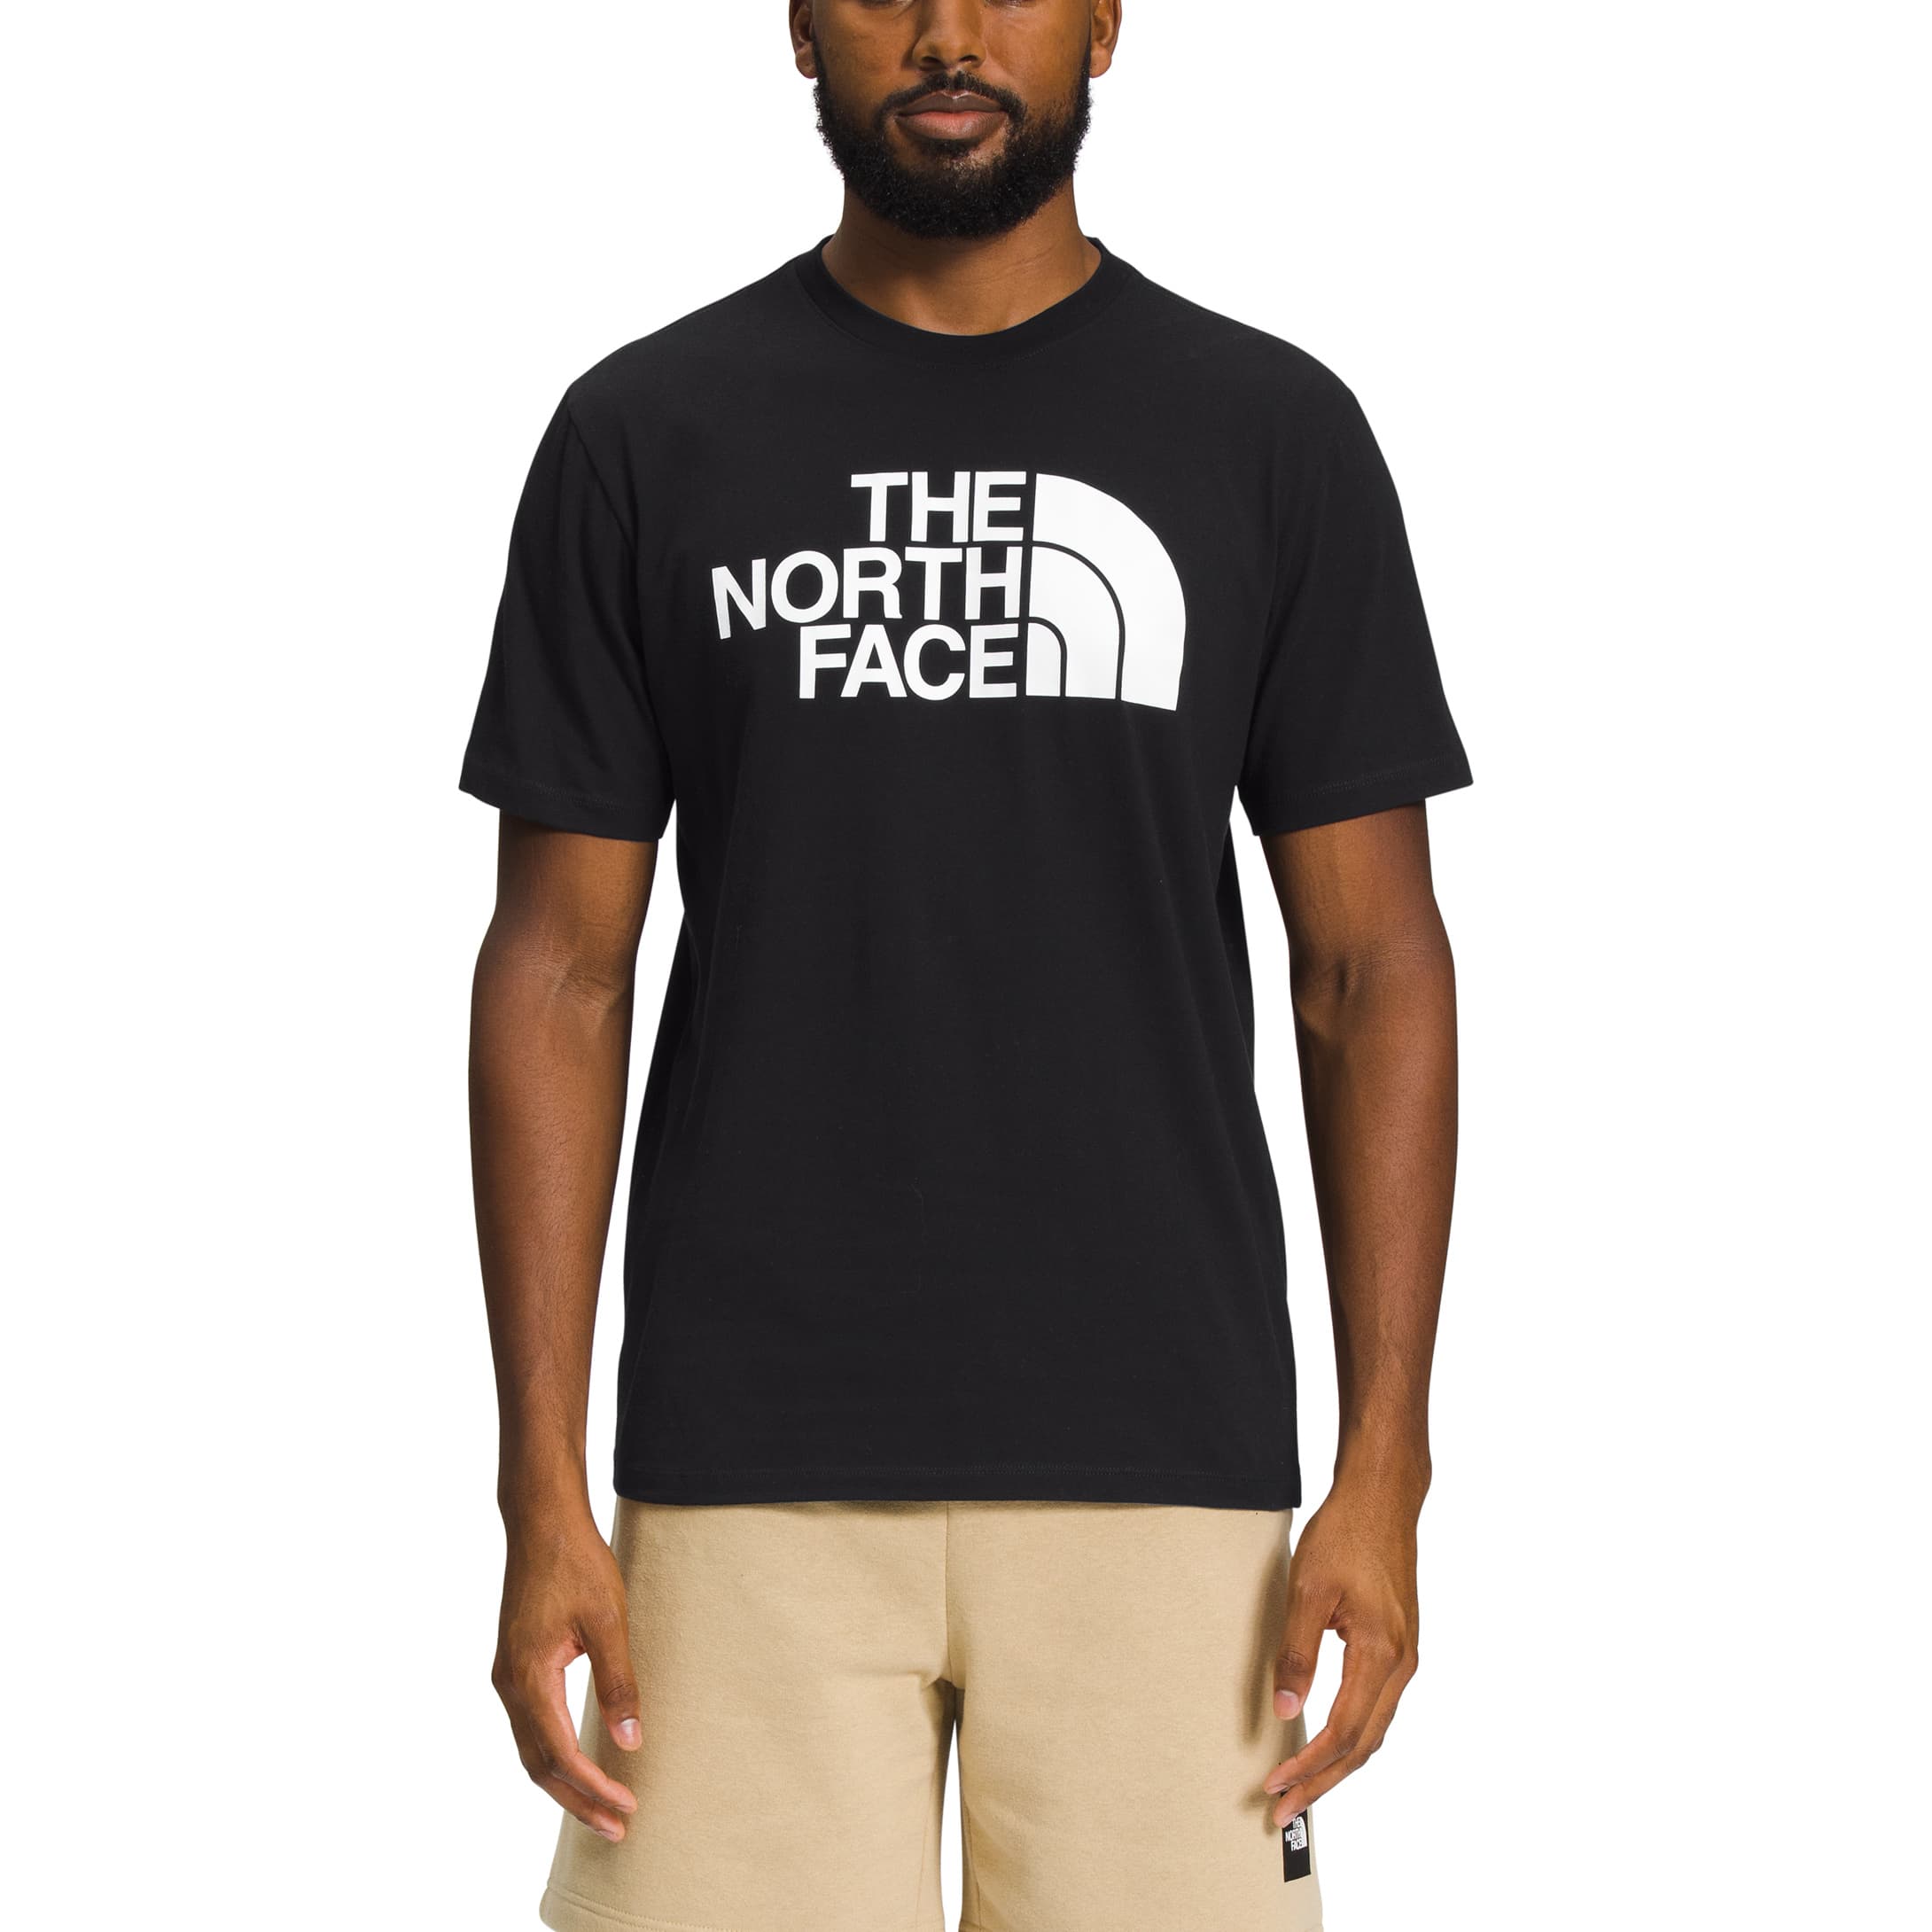 The North Face Men's Never Stop Exploring Tee Shirt - Drifters